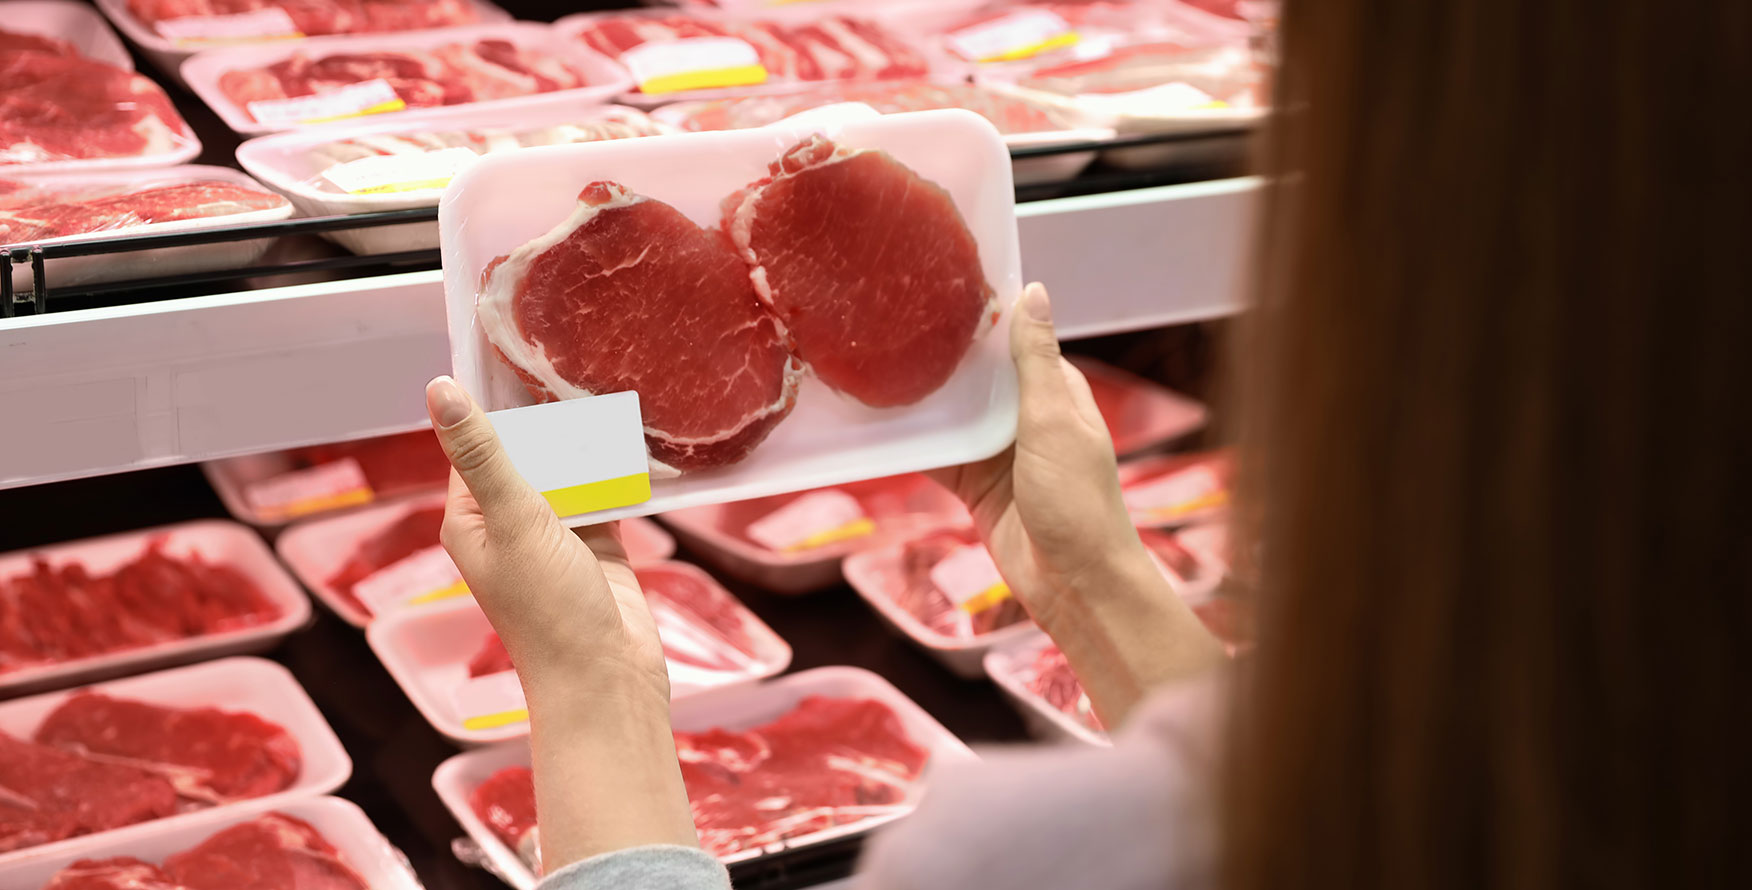 A consumer holding up packaged pork chops in the grocery store